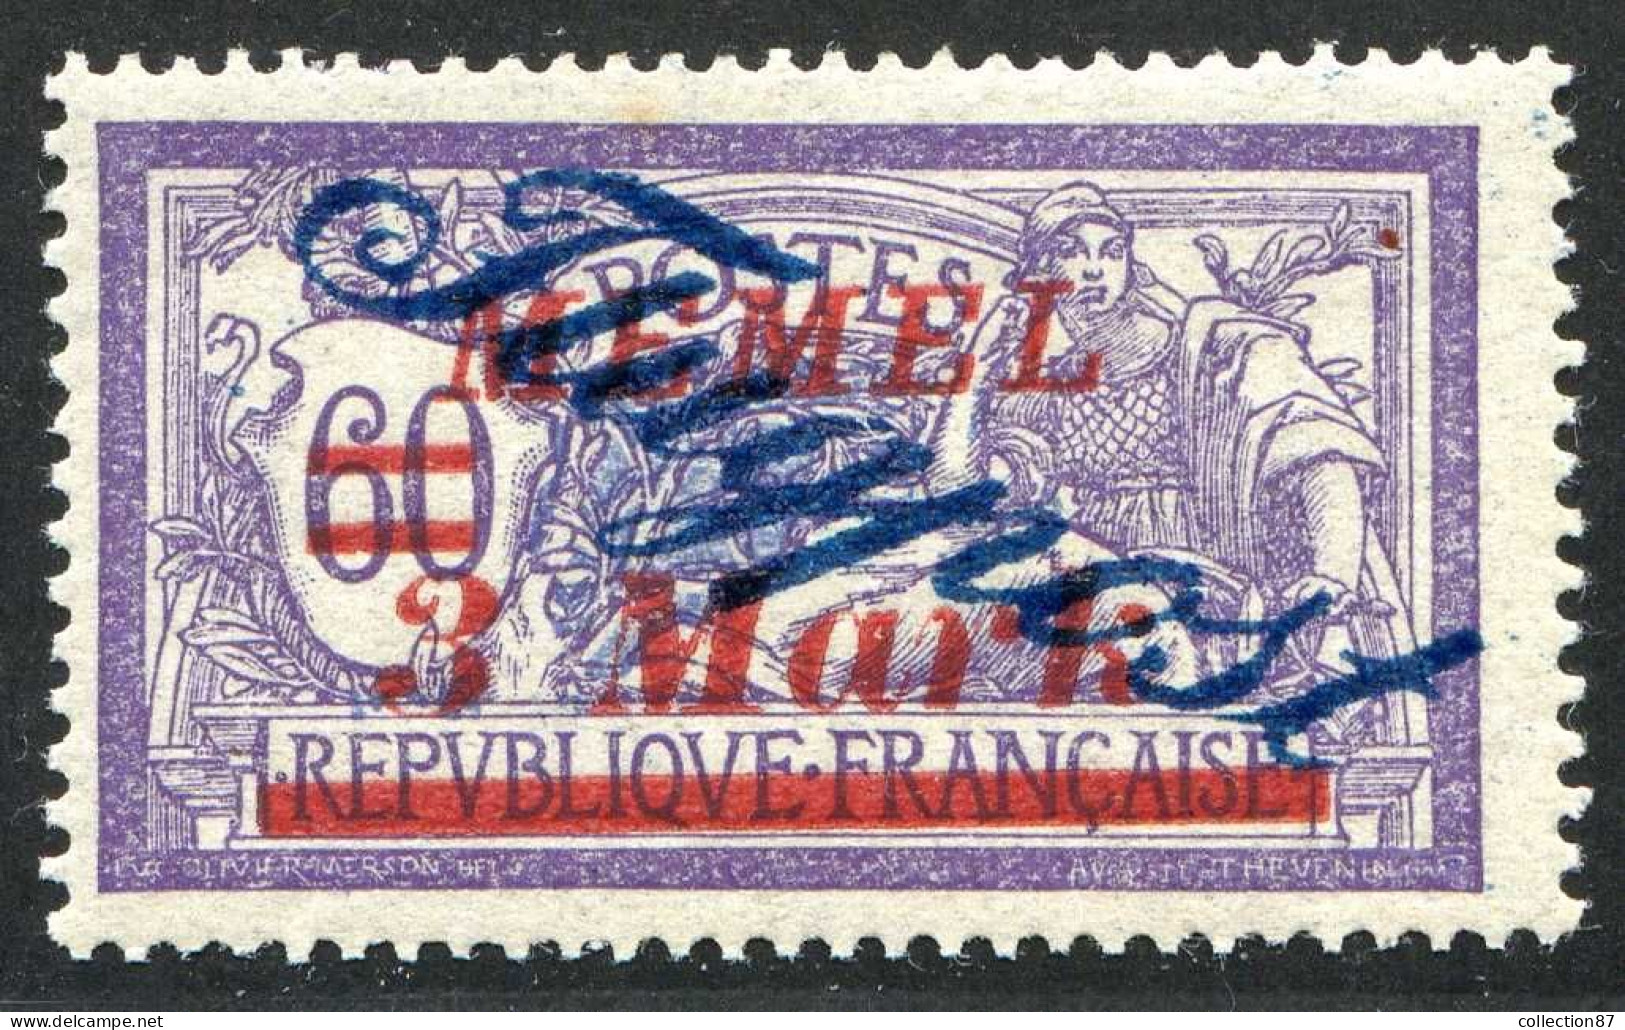 REF 088 > MEMEL FLUGPOST < PA N° 14 * + N° 15 Pour Comparaison < Neuf Ch Dos Visible - MH * > Air Mail - Aéro - Unused Stamps